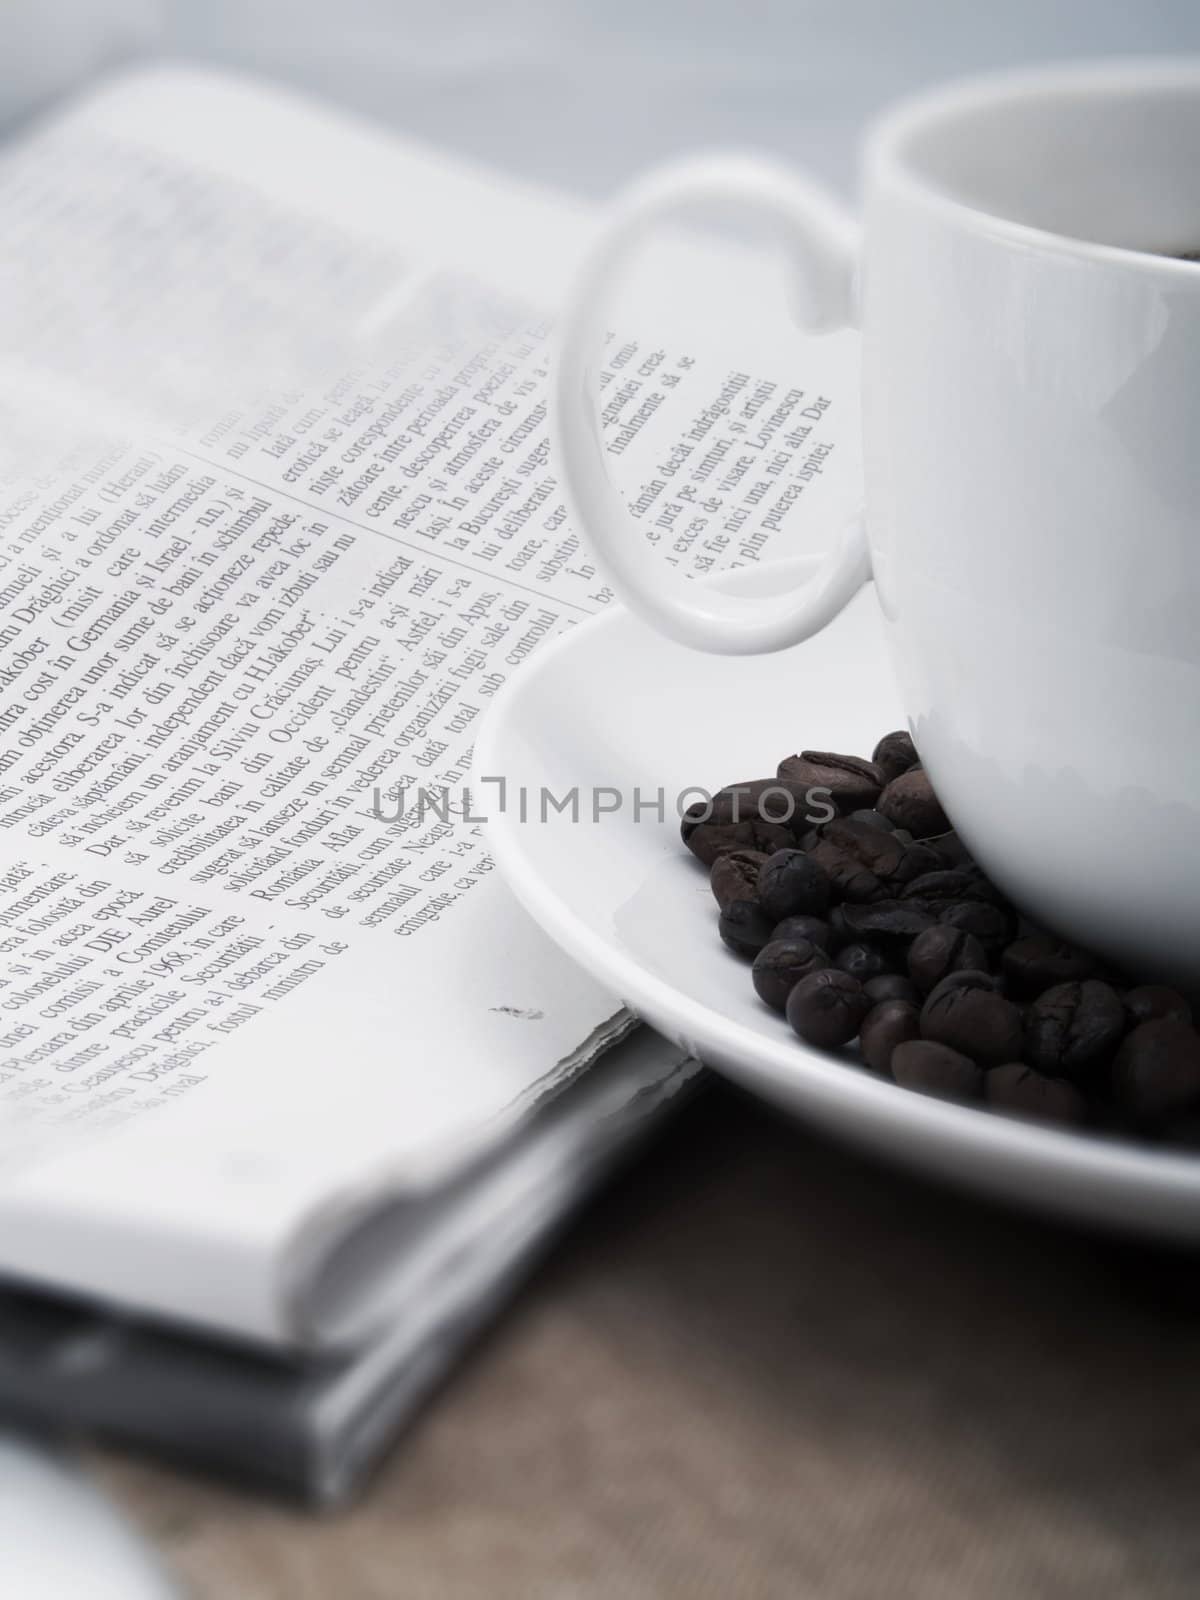 Coffee cup with coffee beans and a newspaper